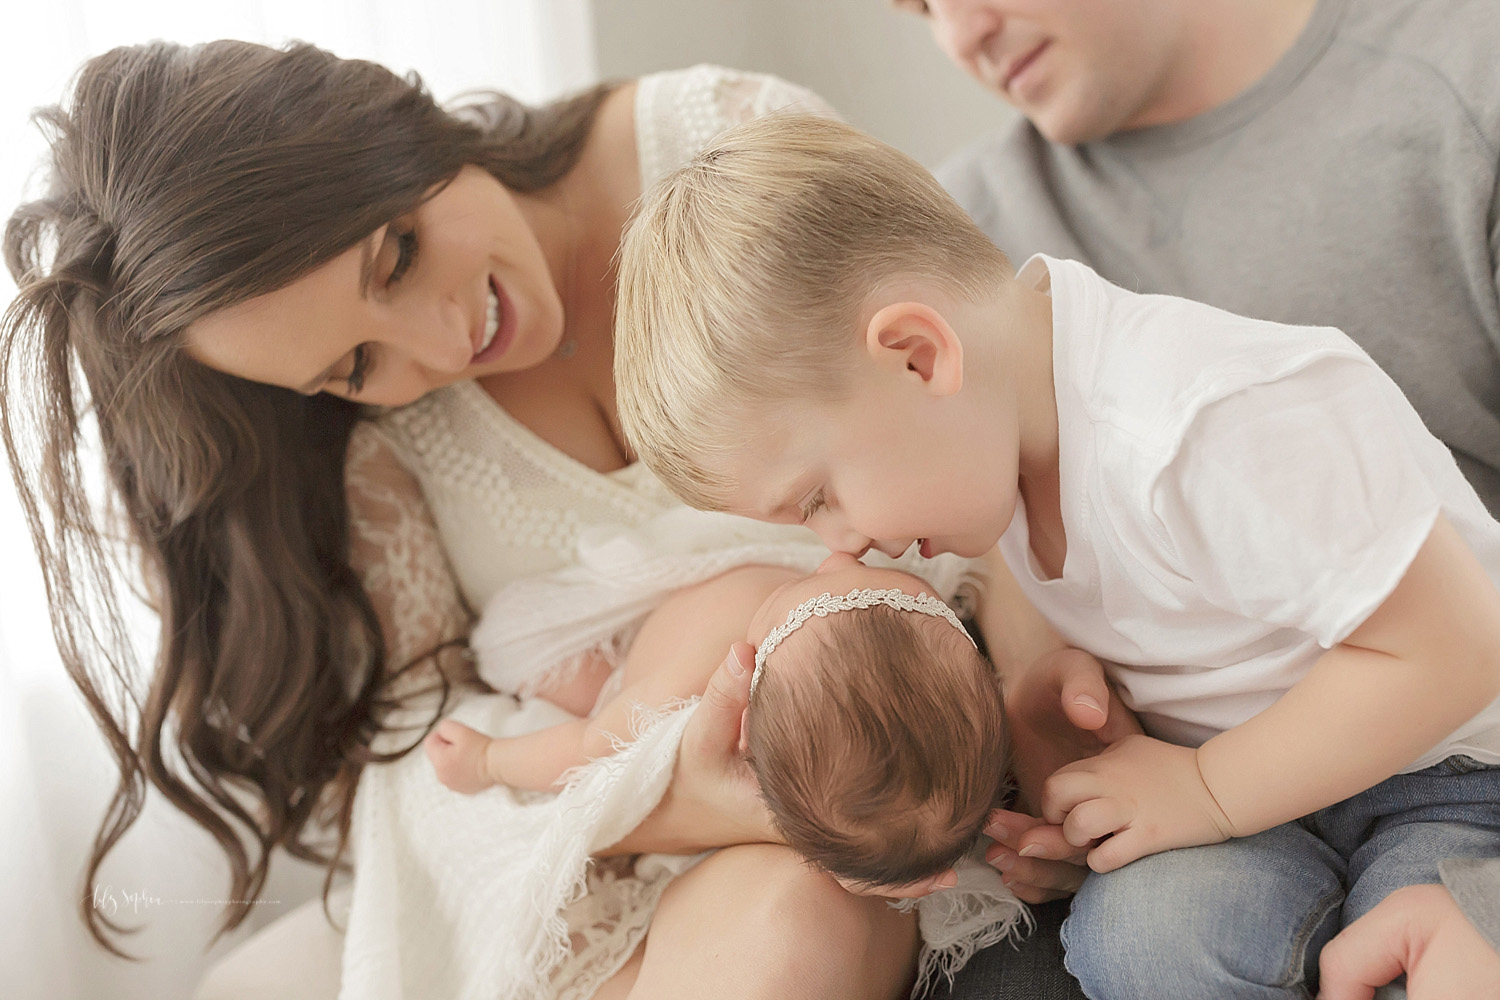  Image of parents, sitting on a couch, holding their newborn daughter on their lap while their 3 year old son leans over and touches his nose to his sister's. 